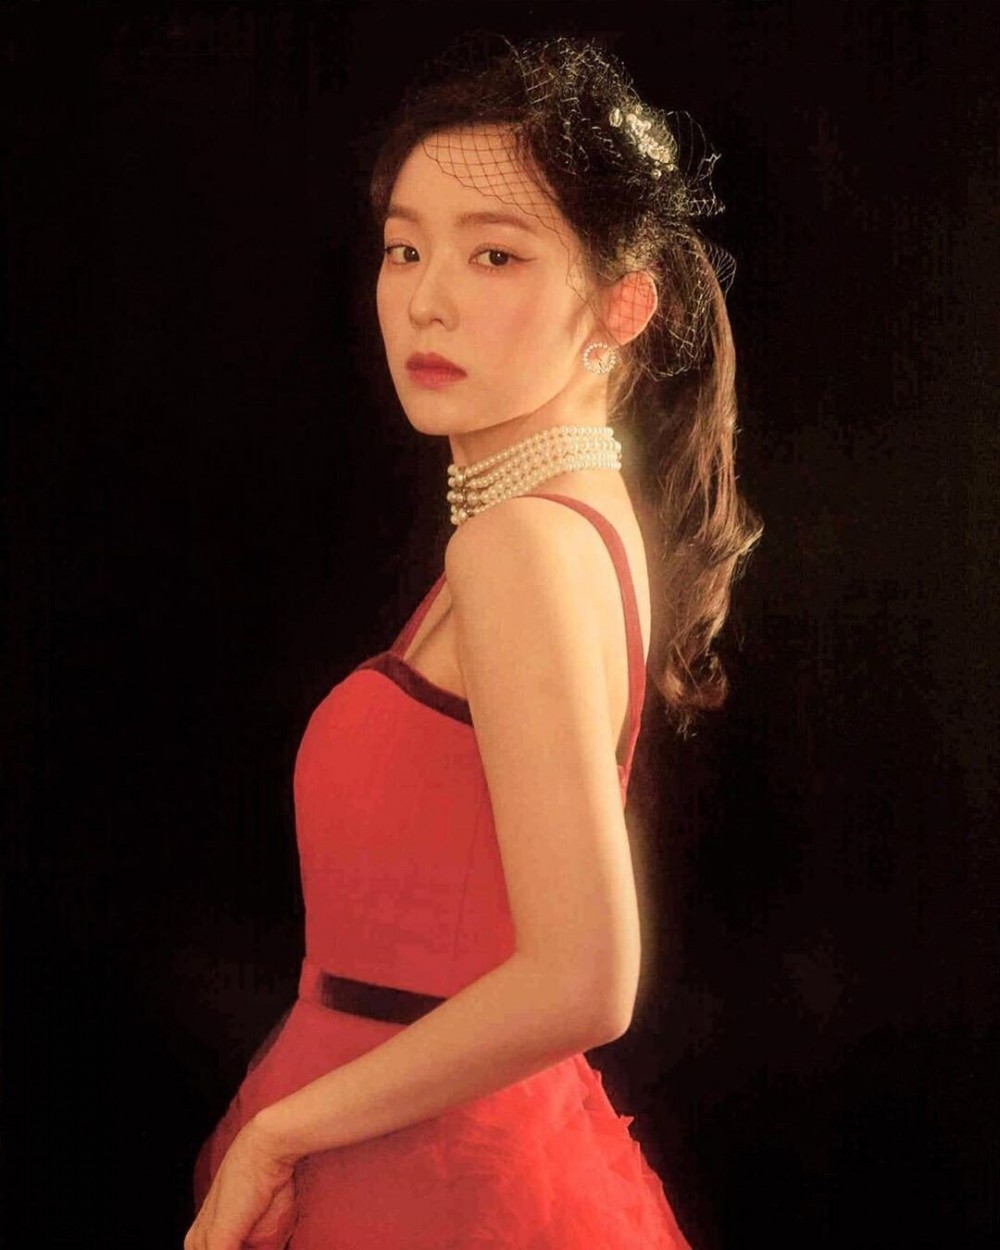 Red Irene's 'La rouge' teaser image tops Real Time Search + netizens comment on her stunning | allkpop